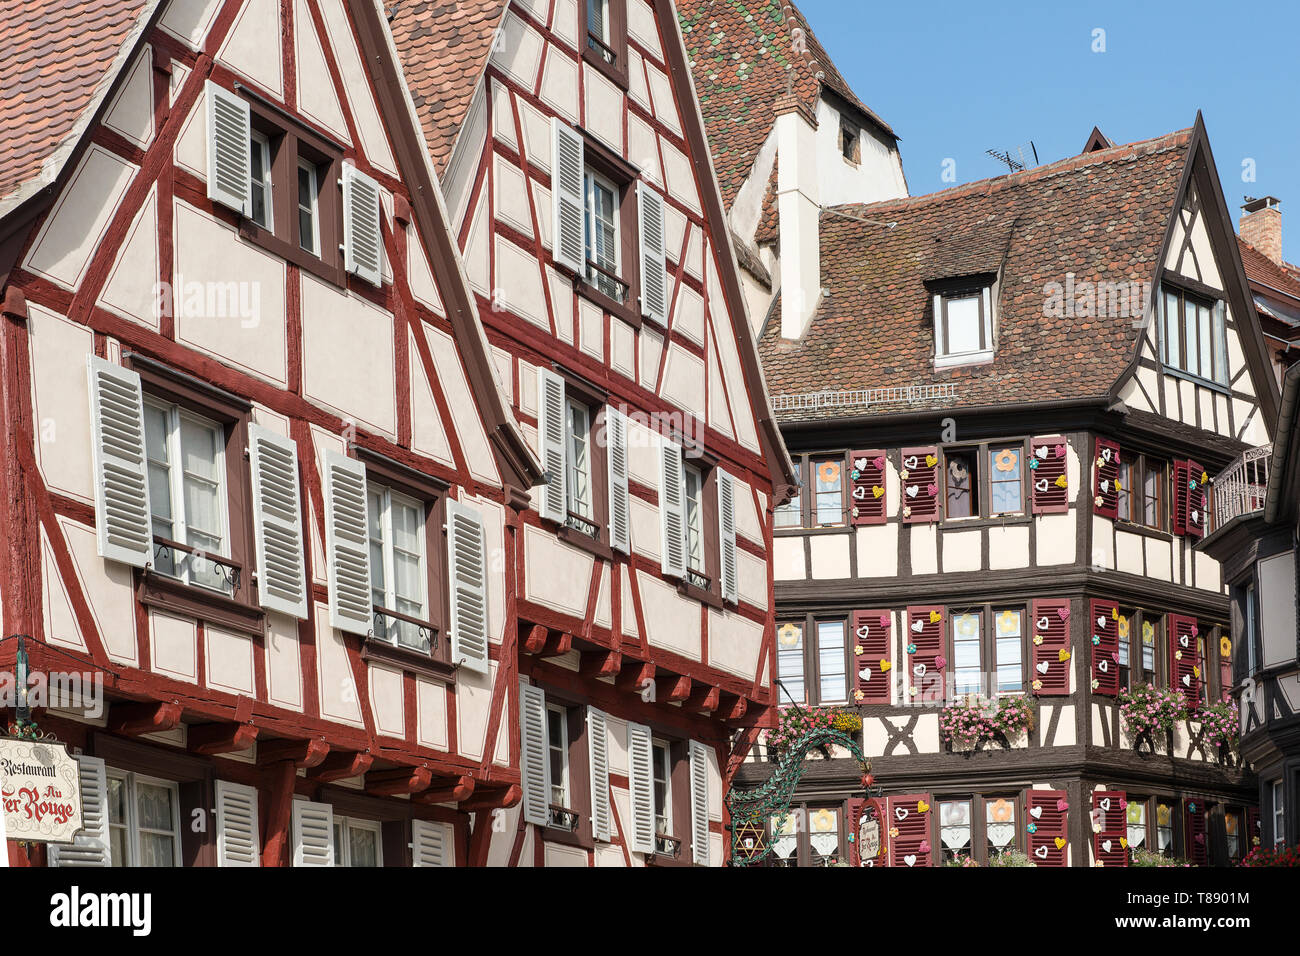 Strasbourg, France - August 14, 2017; Medieval architecture in the streets of strasbourg which is one of the largest cities in the area and populair w Stock Photo